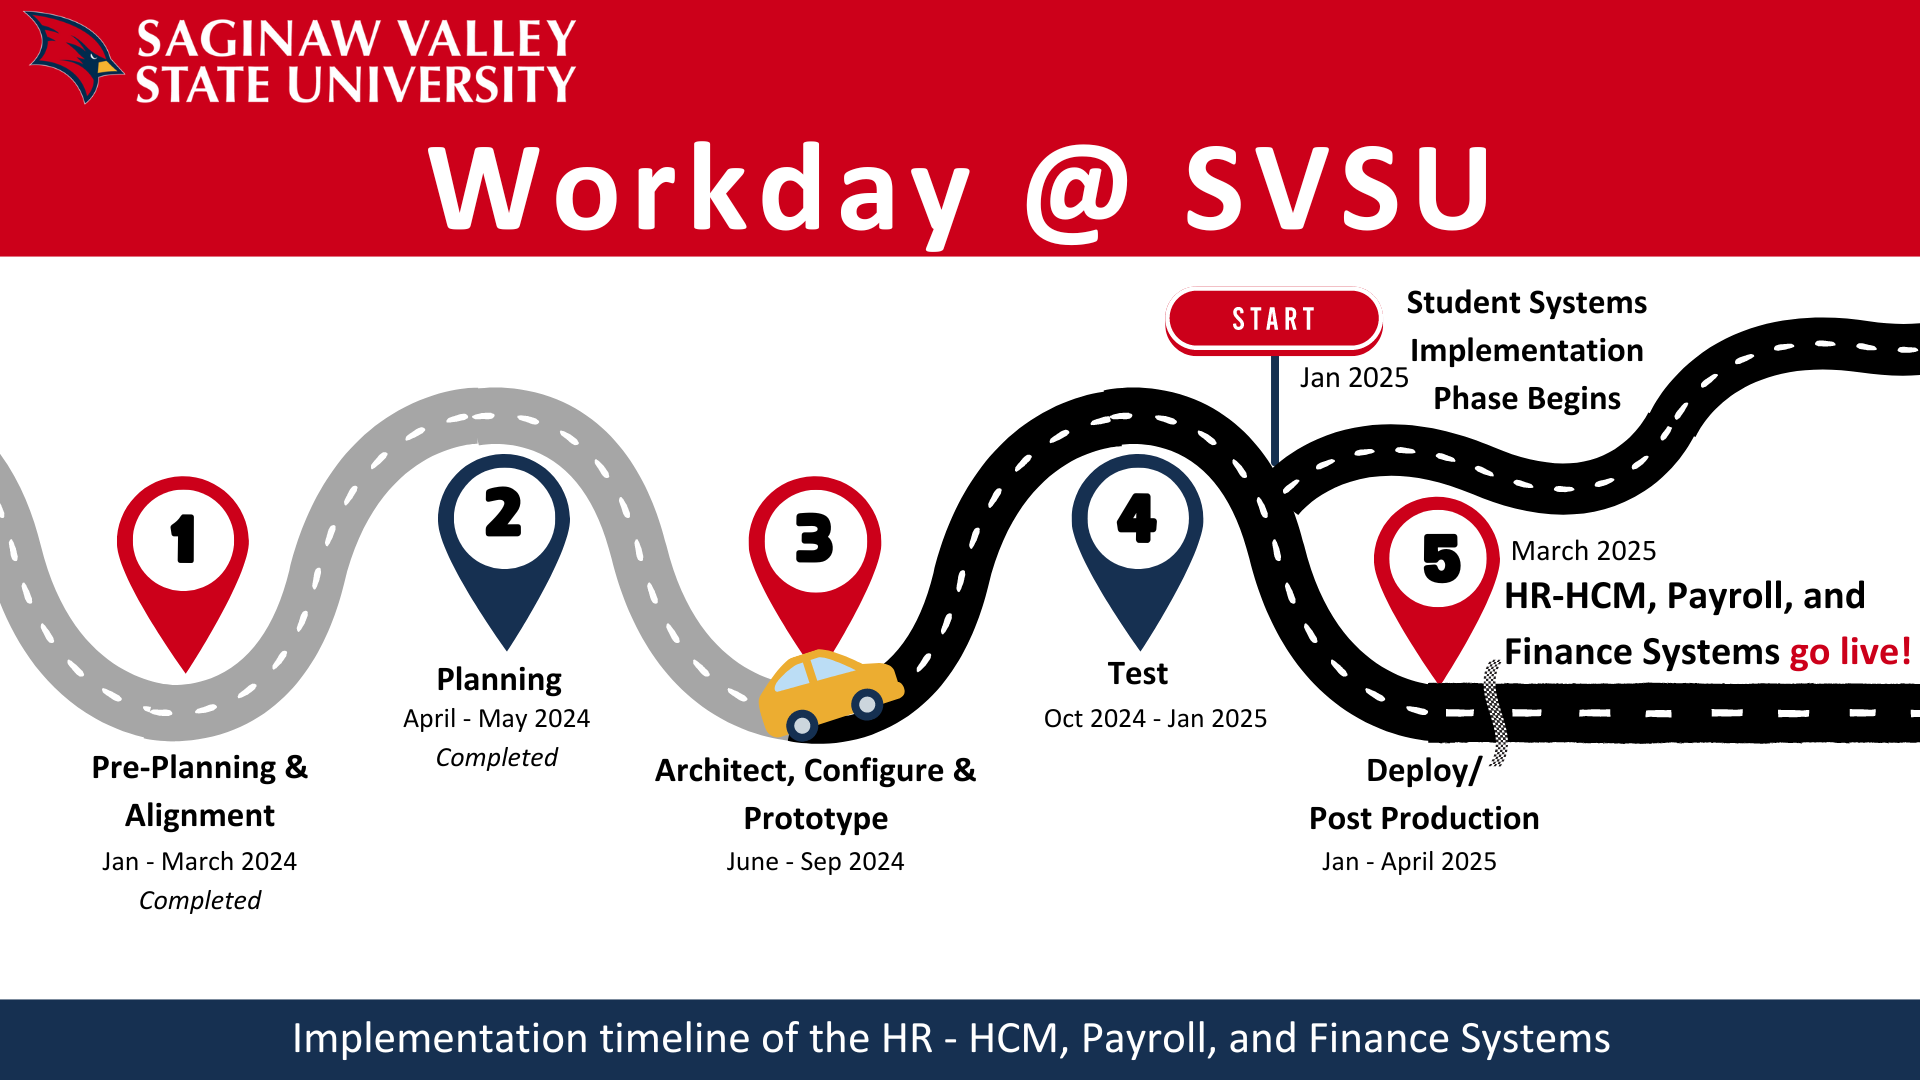 Workday timeline from start to implementation